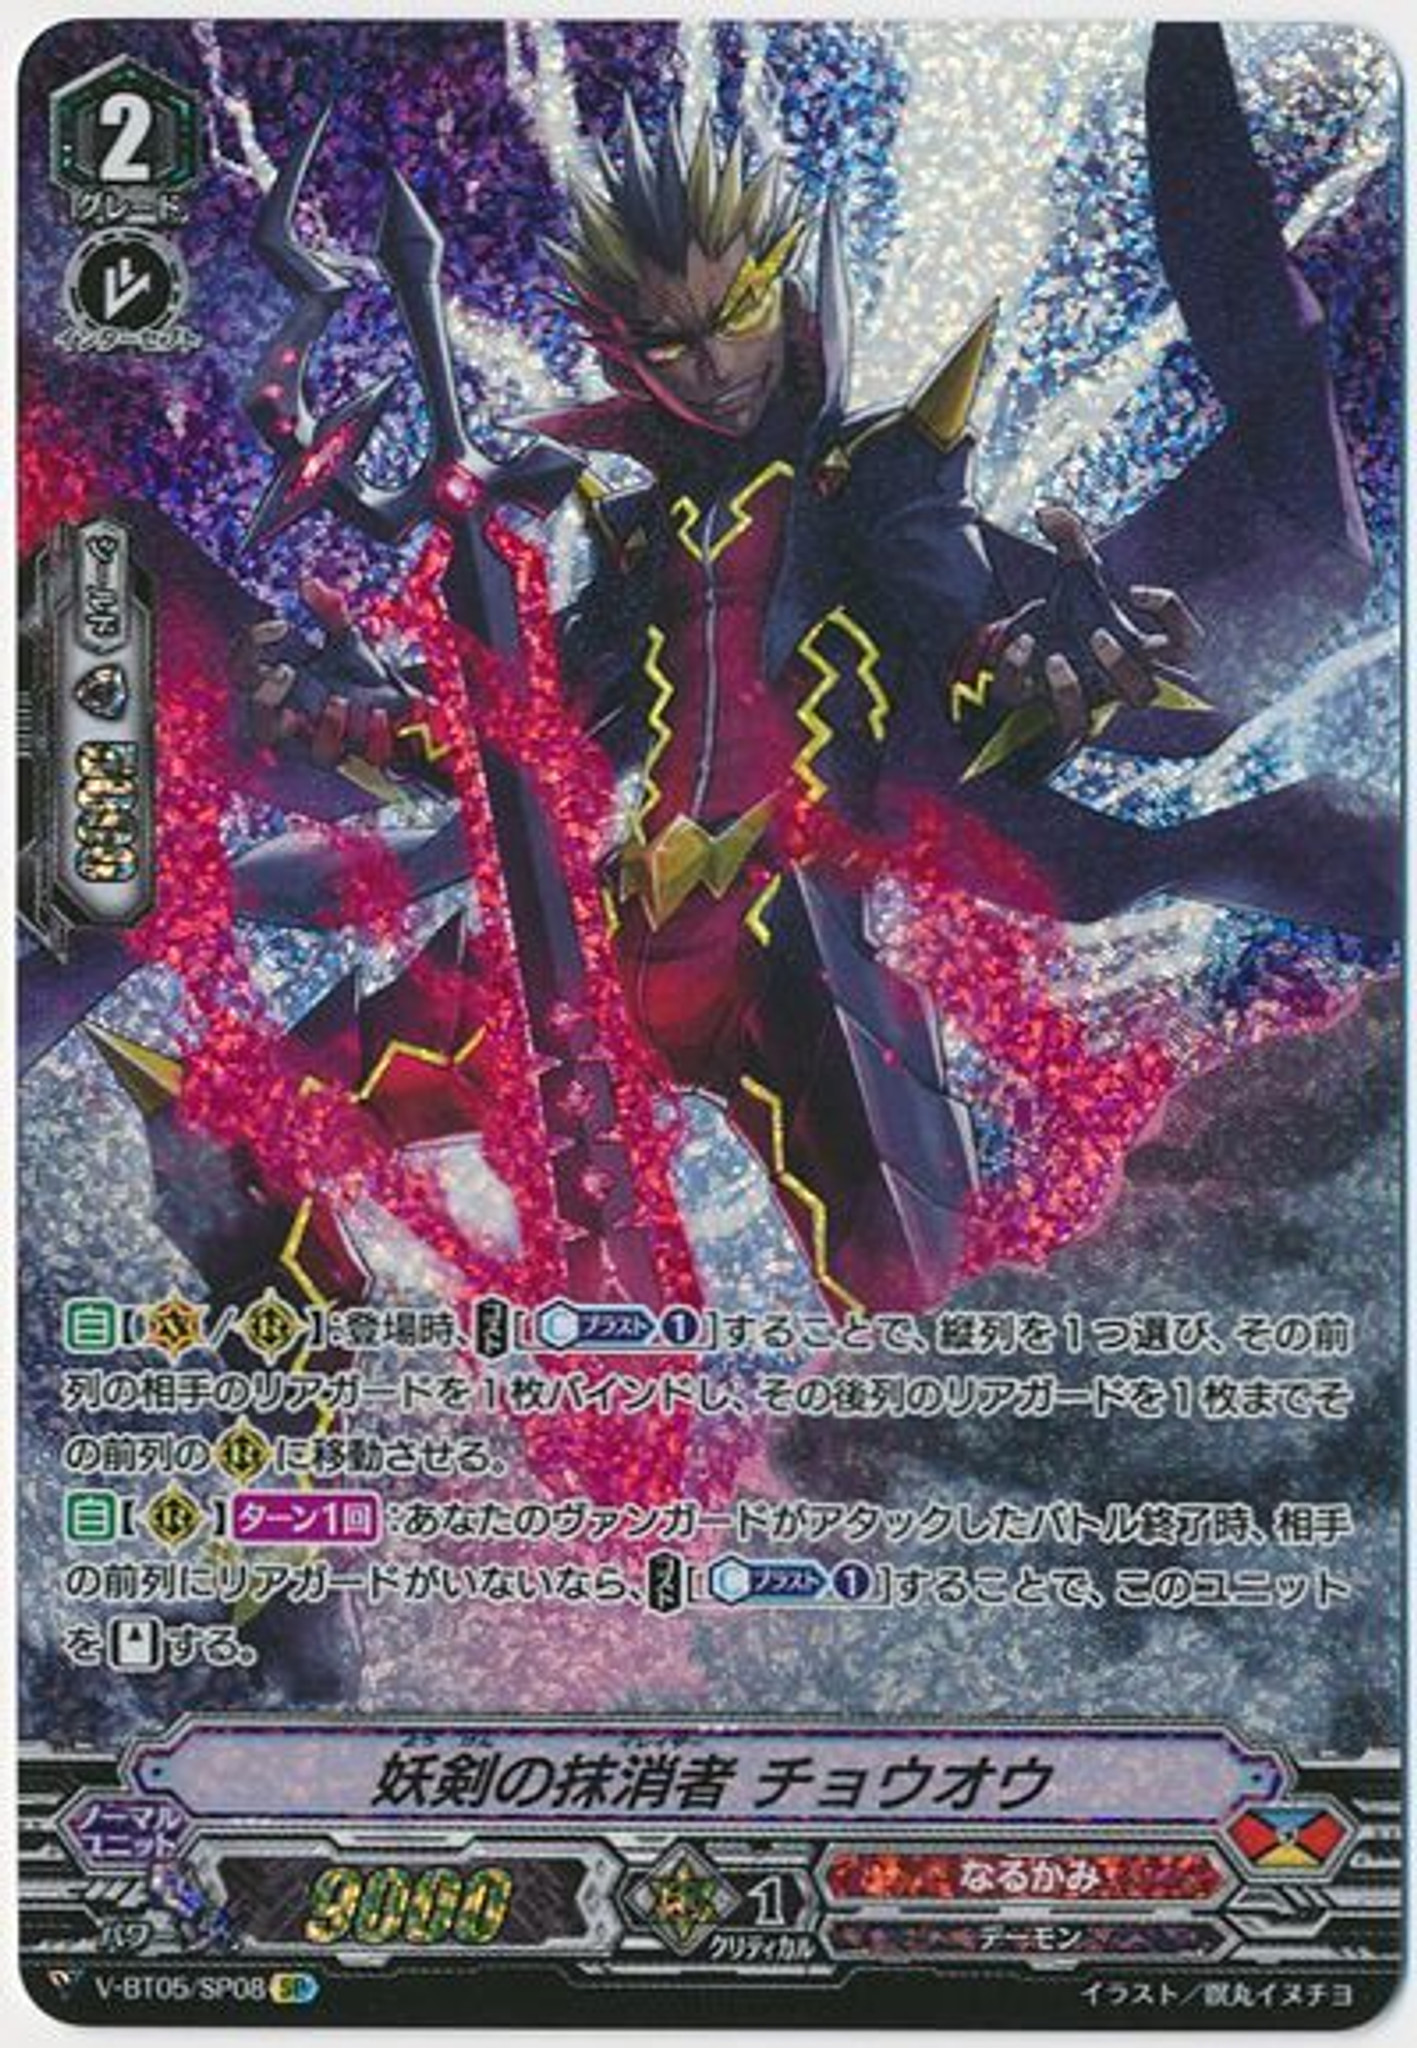 Cardfight Vanguard Japanese Bt11 017 Rr Fiendish Sword Eradicator Cho Ou Toys Hobbies Co Collectible Card Games